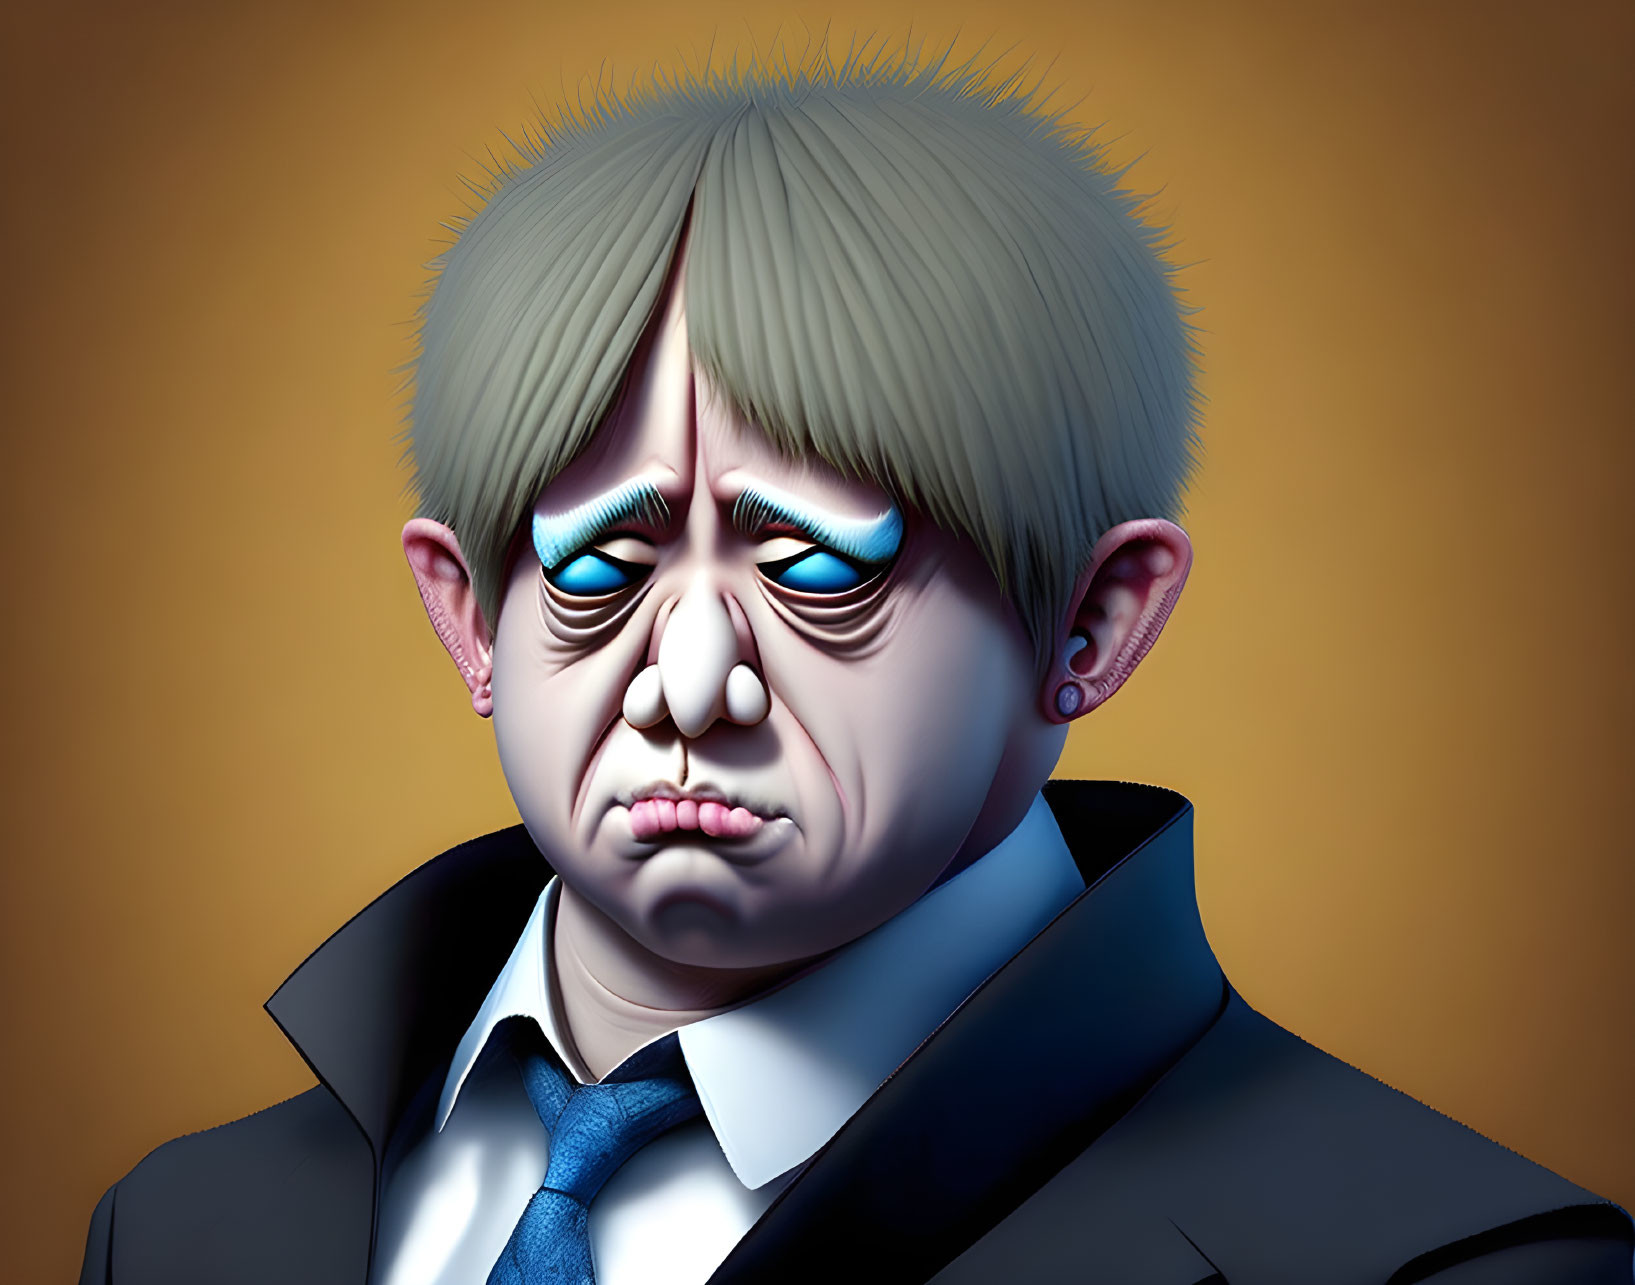 Exaggerated sad man caricature with blond hair and dark suit